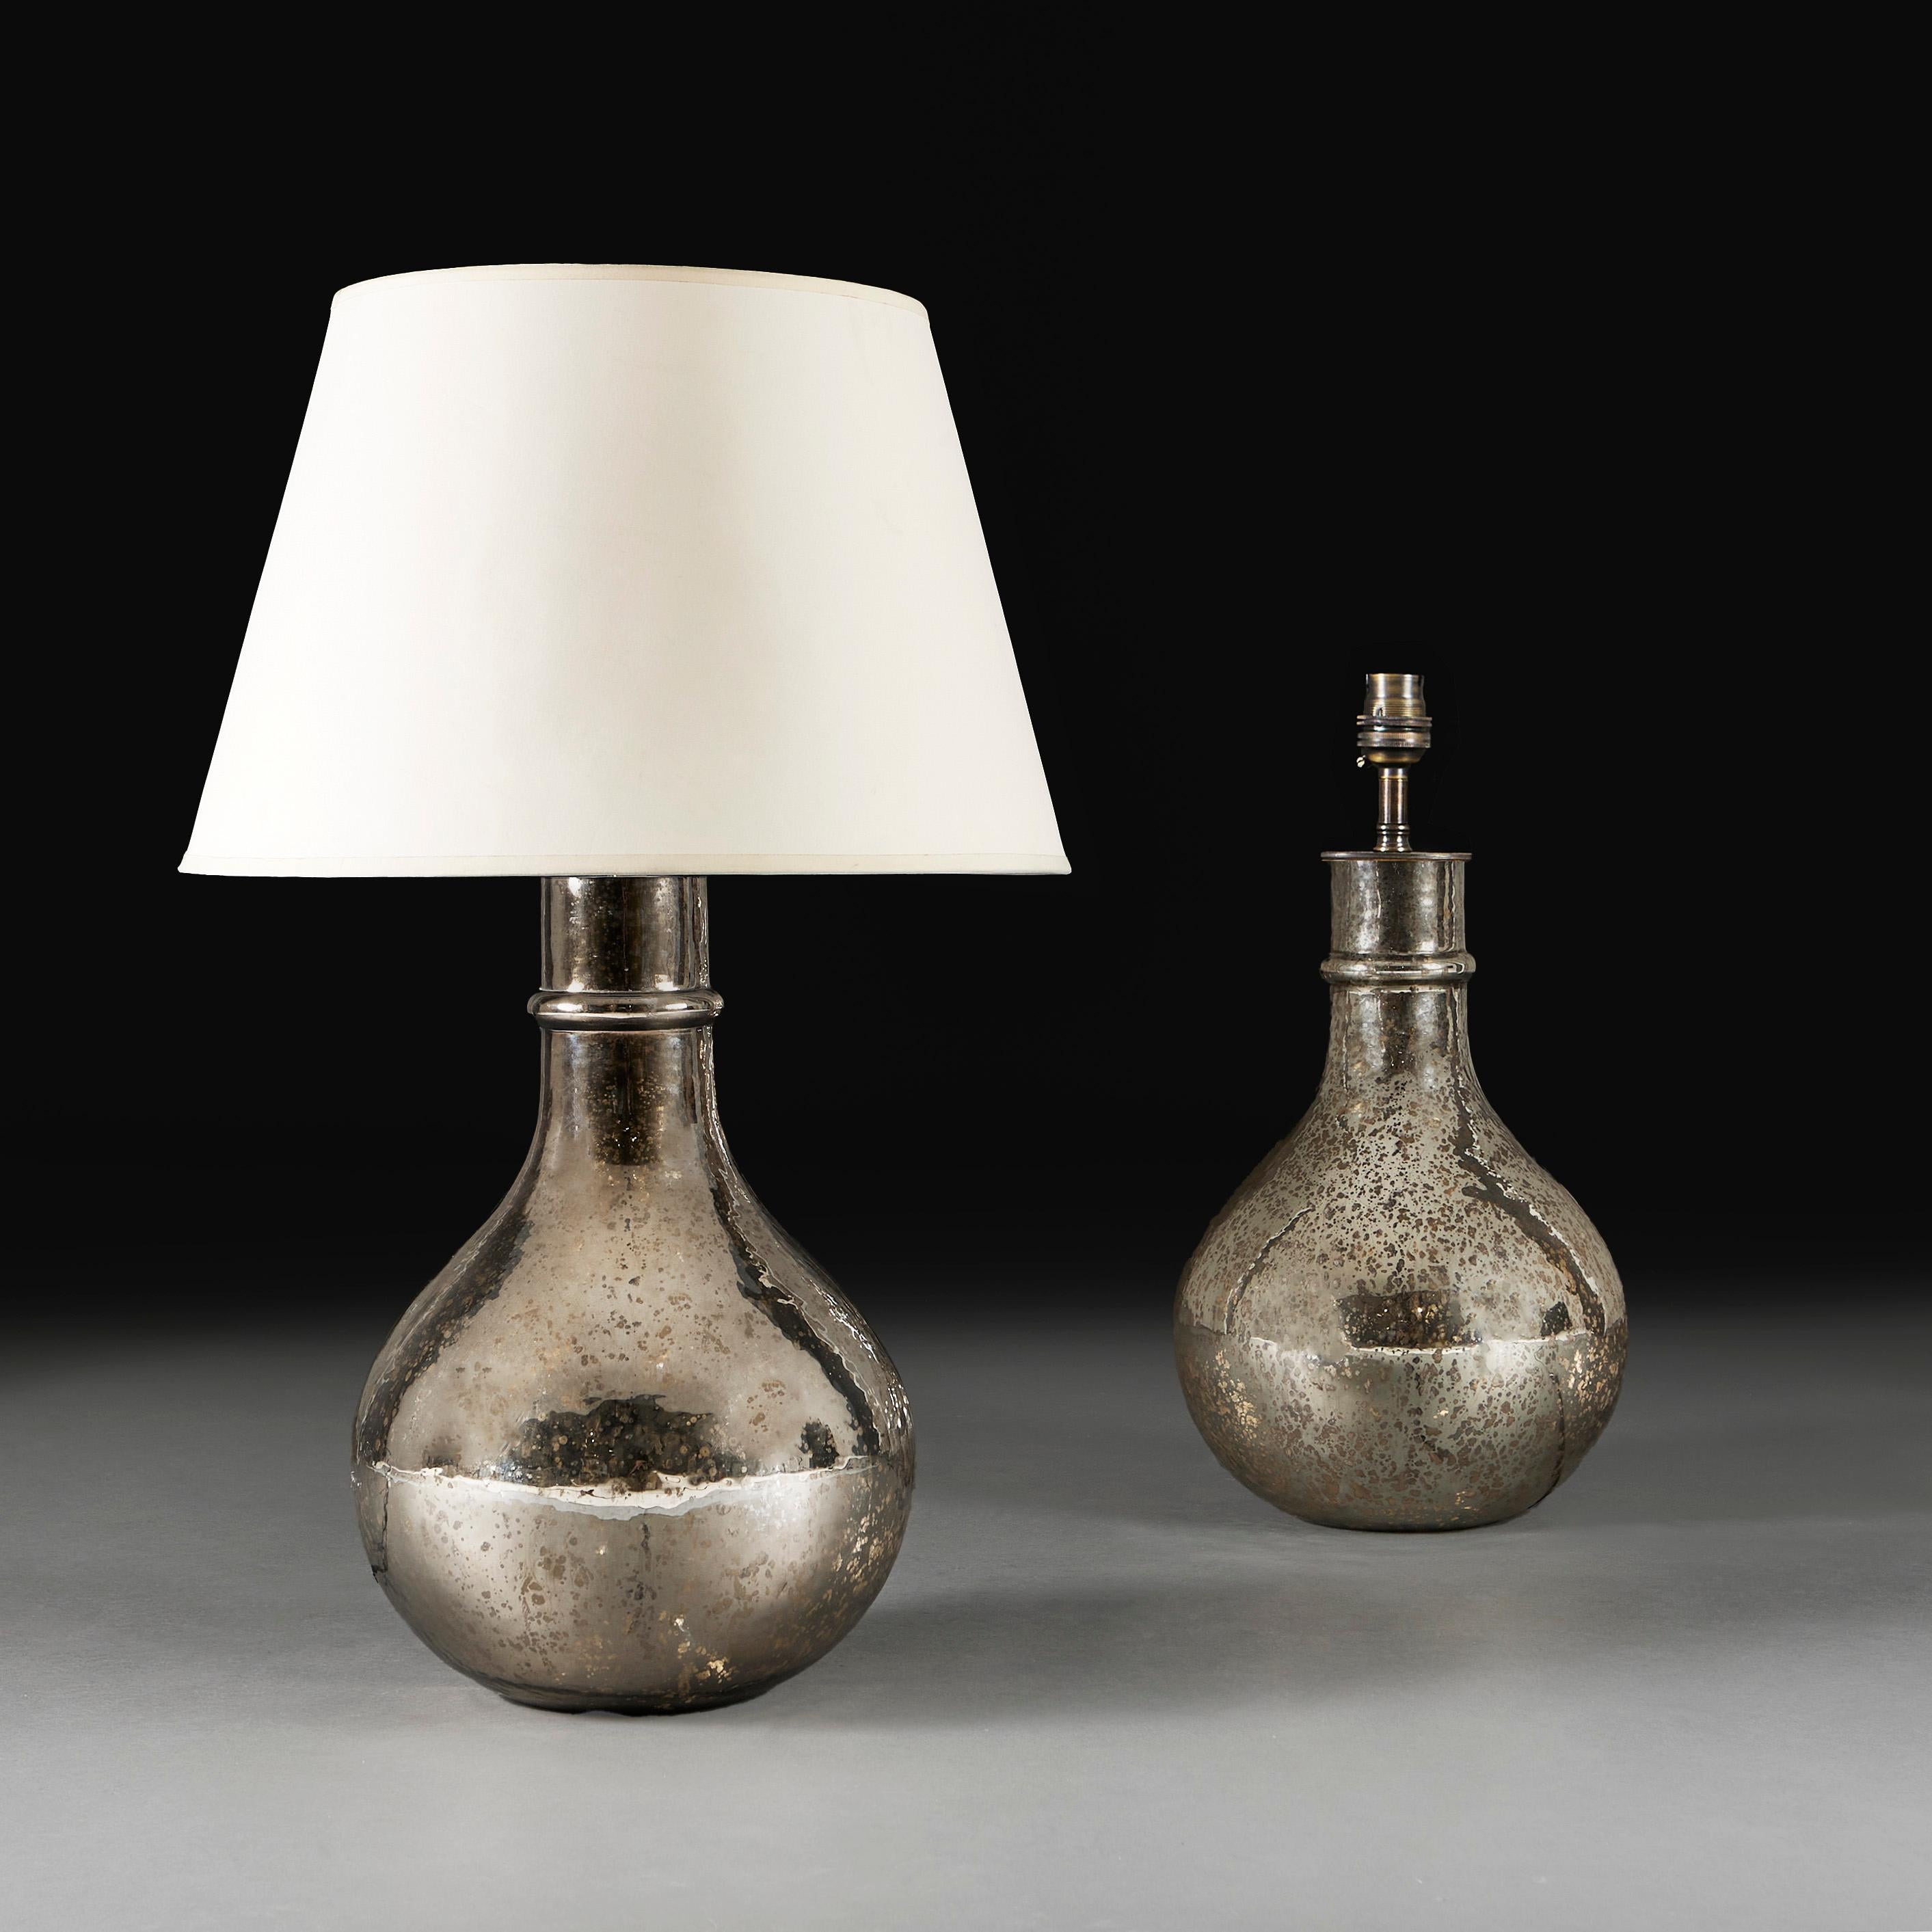 France, modern

A pair of bottle shaped vases of bulbous form, decorated with patinated mercury glass, now as lamps.

Height of vase     44.00cm
Height with lampshades   73.00cm
Diameter of base  26.00cm

Please note: Does not include Lampshades.